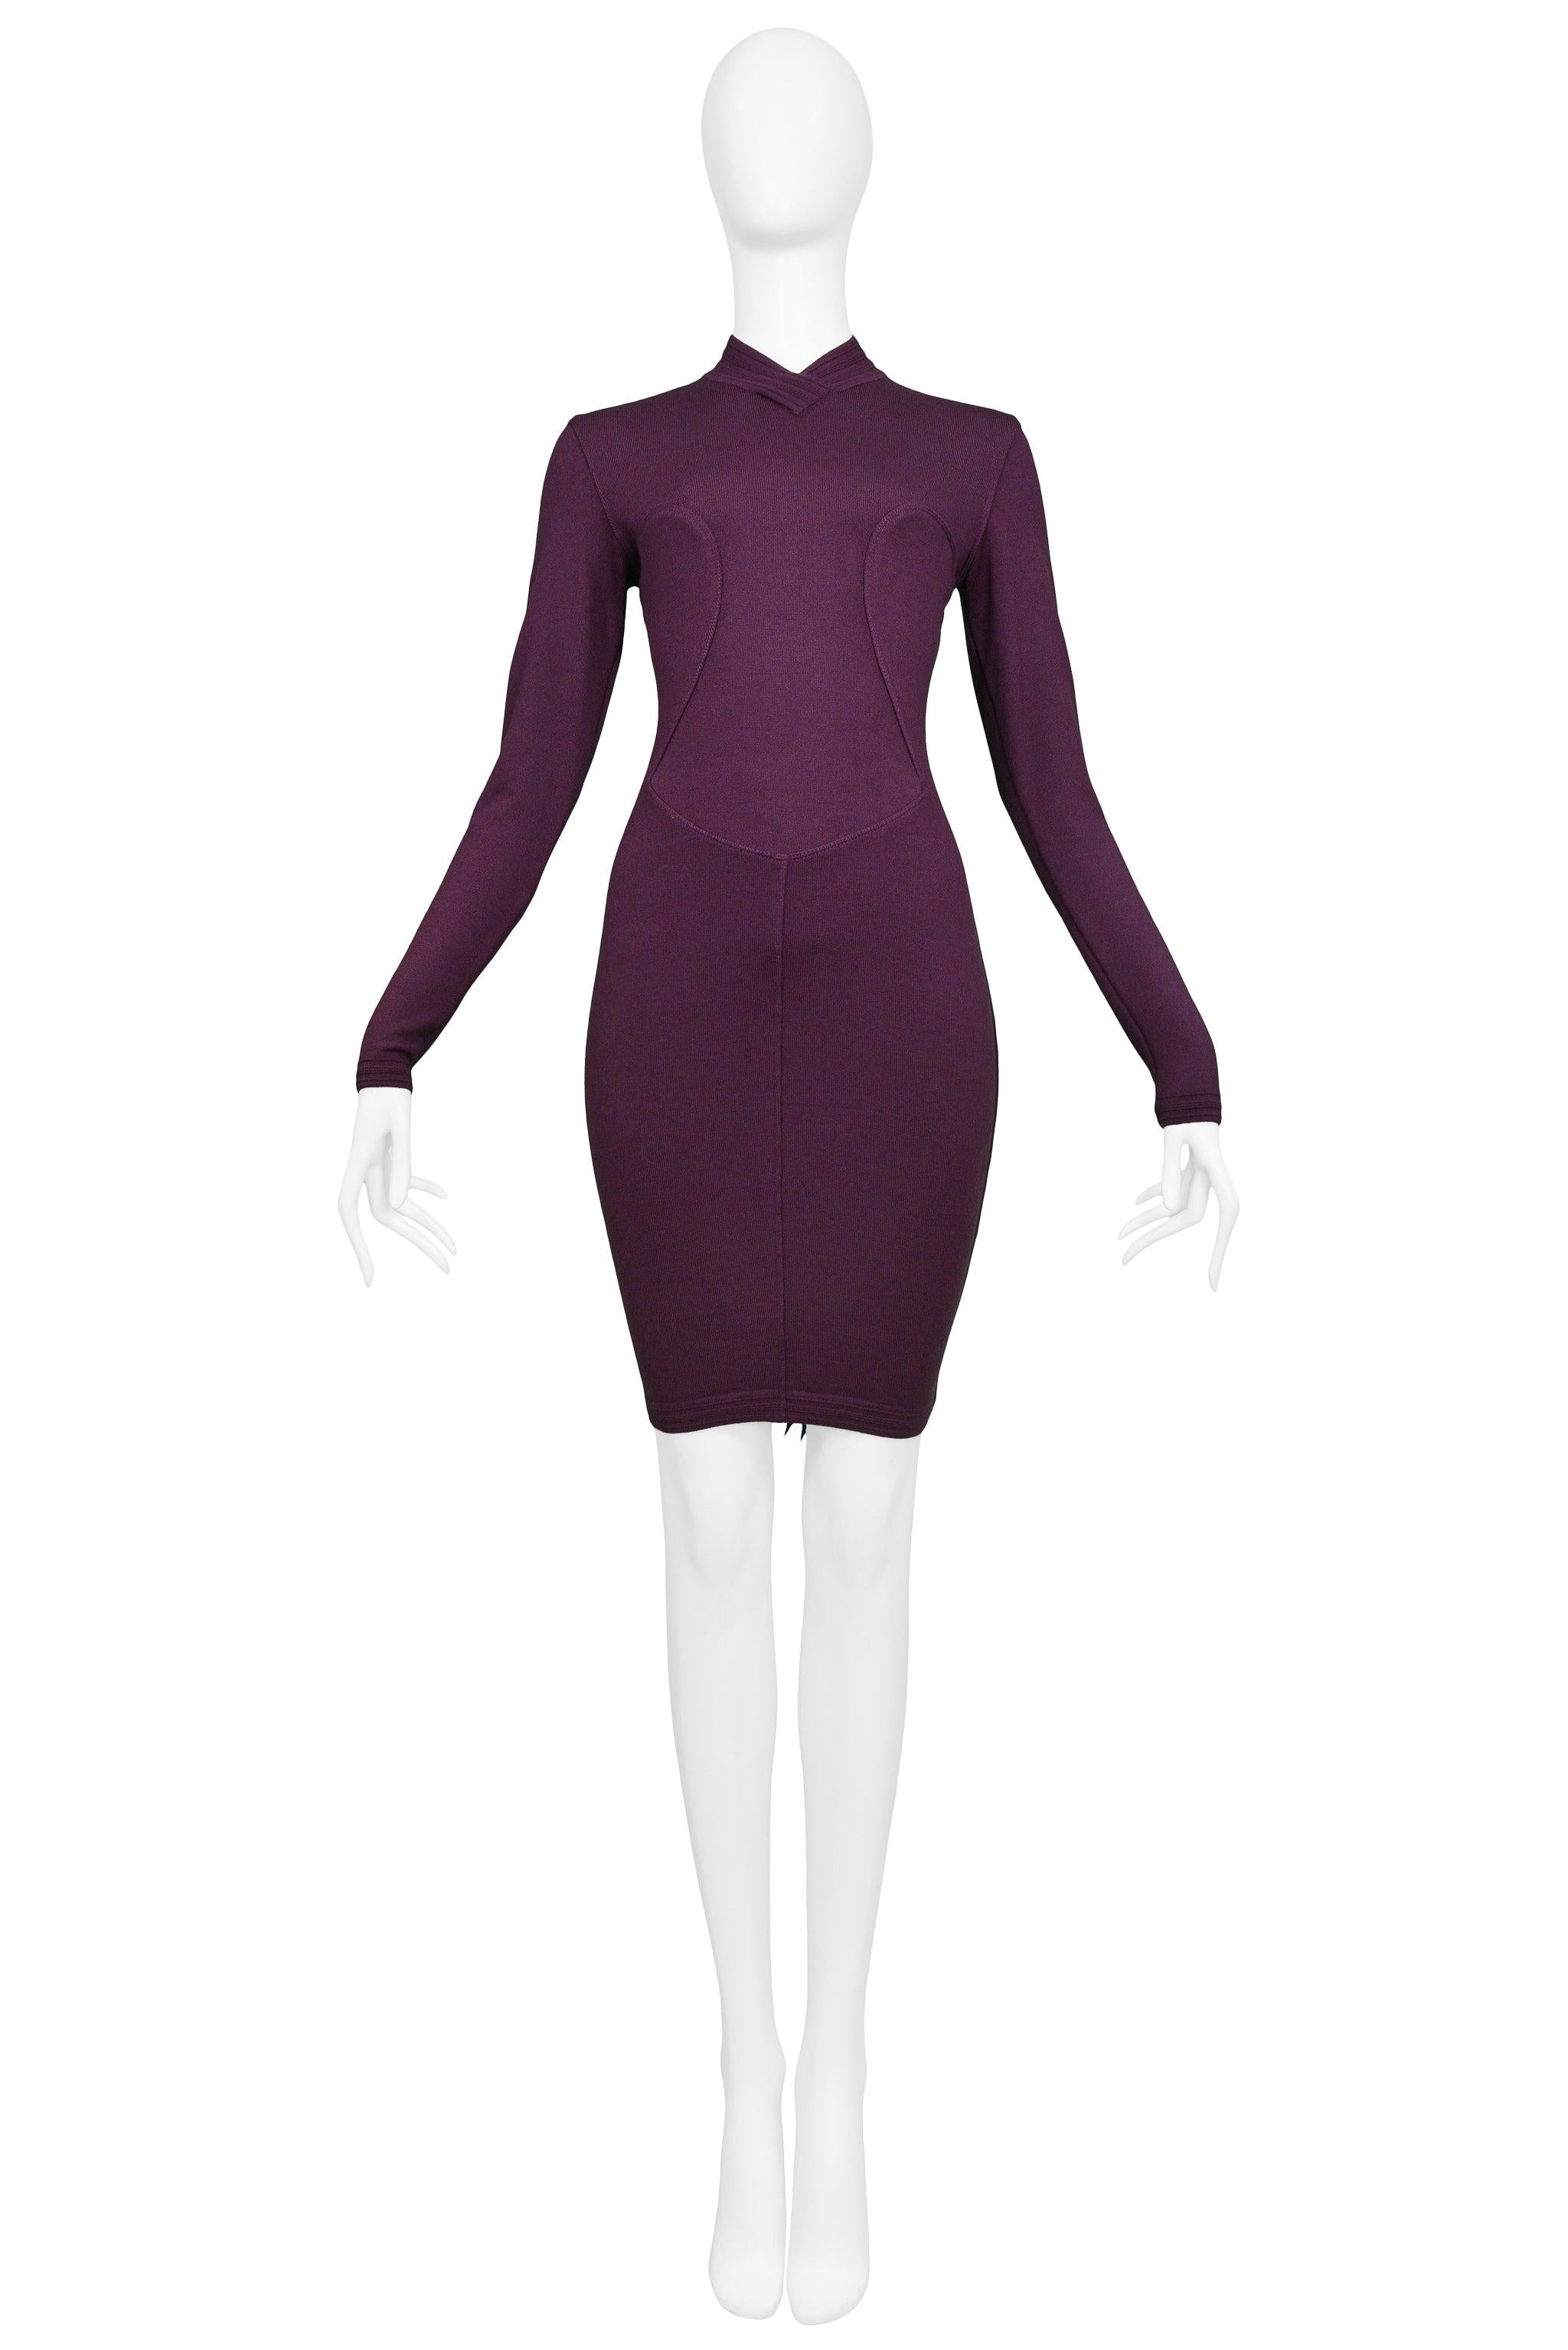 Resurrection Vintage is excited to offer a vintage Azzedine Alaia purple long sleeve body-con dress featuring a high collar neck, curved seams on the bodice, a fitted skirt, and a center back zipper. 

Alaia Label
Size Medium
Measurements: (flat